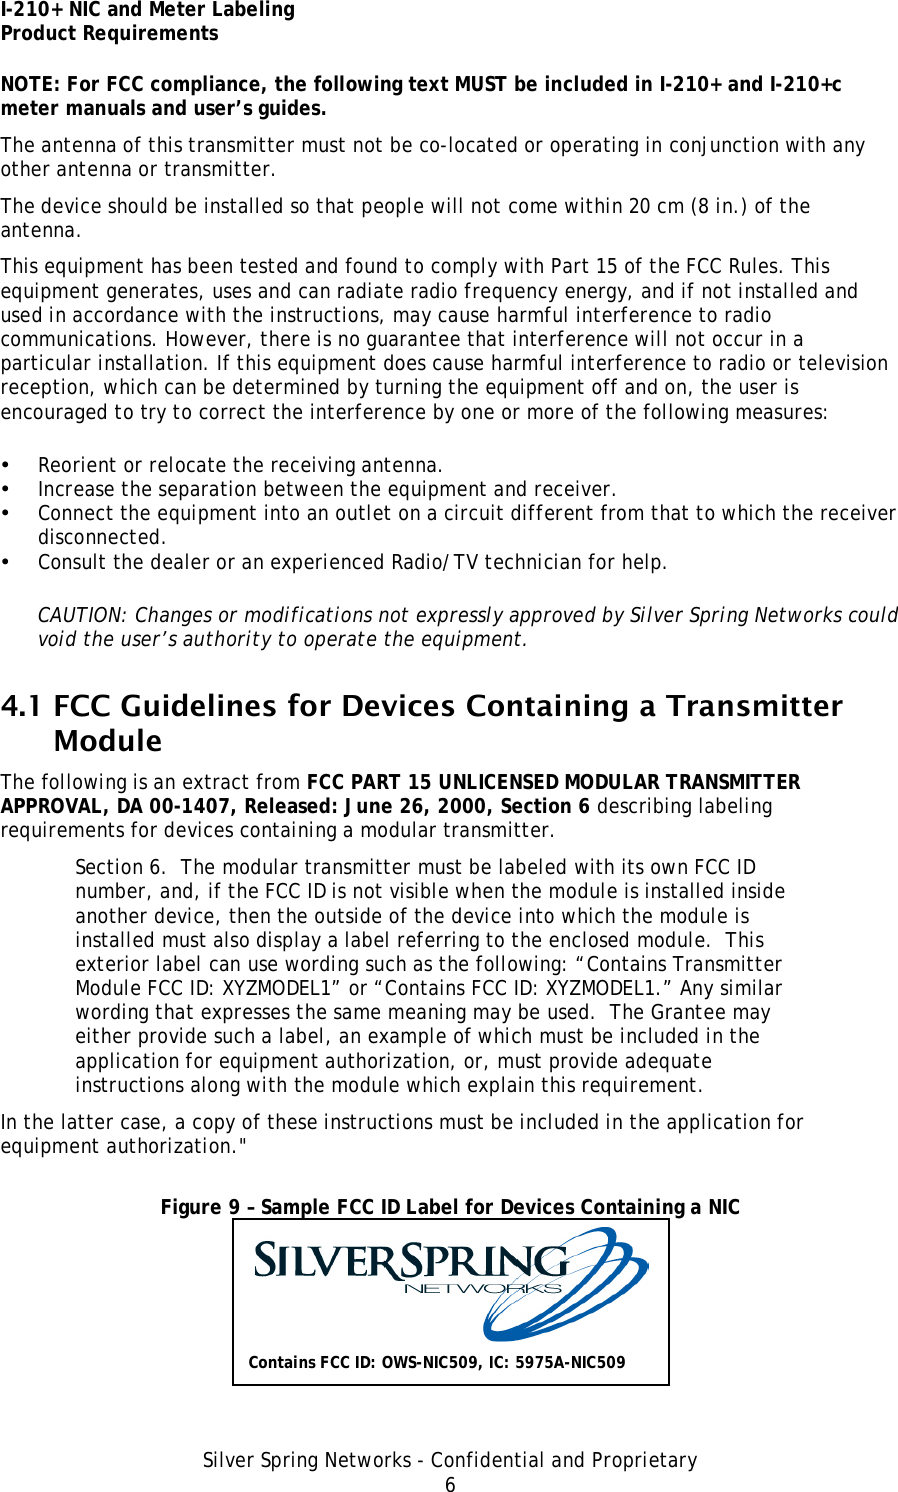 I-210+ NIC and Meter Labeling Product Requirements Silver Spring Networks - Confidential and Proprietary 6 NOTE: For FCC compliance, the following text MUST be included in I-210+ and I-210+c meter manuals and user’s guides. The antenna of this transmitter must not be co-located or operating in conjunction with any other antenna or transmitter. The device should be installed so that people will not come within 20 cm (8 in.) of the antenna. This equipment has been tested and found to comply with Part 15 of the FCC Rules. This equipment generates, uses and can radiate radio frequency energy, and if not installed and used in accordance with the instructions, may cause harmful interference to radio communications. However, there is no guarantee that interference will not occur in a particular installation. If this equipment does cause harmful interference to radio or television reception, which can be determined by turning the equipment off and on, the user is encouraged to try to correct the interference by one or more of the following measures: • Reorient or relocate the receiving antenna. • Increase the separation between the equipment and receiver. • Connect the equipment into an outlet on a circuit different from that to which the receiver disconnected. • Consult the dealer or an experienced Radio/TV technician for help. CAUTION: Changes or modifications not expressly approved by Silver Spring Networks could void the user’s authority to operate the equipment. 4.1 FCC Guidelines for Devices Containing a Transmitter Module The following is an extract from FCC PART 15 UNLICENSED MODULAR TRANSMITTER APPROVAL, DA 00-1407, Released: June 26, 2000, Section 6 describing labeling requirements for devices containing a modular transmitter. Section 6.  The modular transmitter must be labeled with its own FCC ID number, and, if the FCC ID is not visible when the module is installed inside another device, then the outside of the device into which the module is installed must also display a label referring to the enclosed module.  This exterior label can use wording such as the following: “Contains Transmitter Module FCC ID: XYZMODEL1” or “Contains FCC ID: XYZMODEL1.” Any similar wording that expresses the same meaning may be used.  The Grantee may either provide such a label, an example of which must be included in the application for equipment authorization, or, must provide adequate instructions along with the module which explain this requirement.  In the latter case, a copy of these instructions must be included in the application for equipment authorization.&quot;  Figure 9 – Sample FCC ID Label for Devices Containing a NIC  Contains FCC ID: OWS-NIC509, IC: 5975A-NIC509 